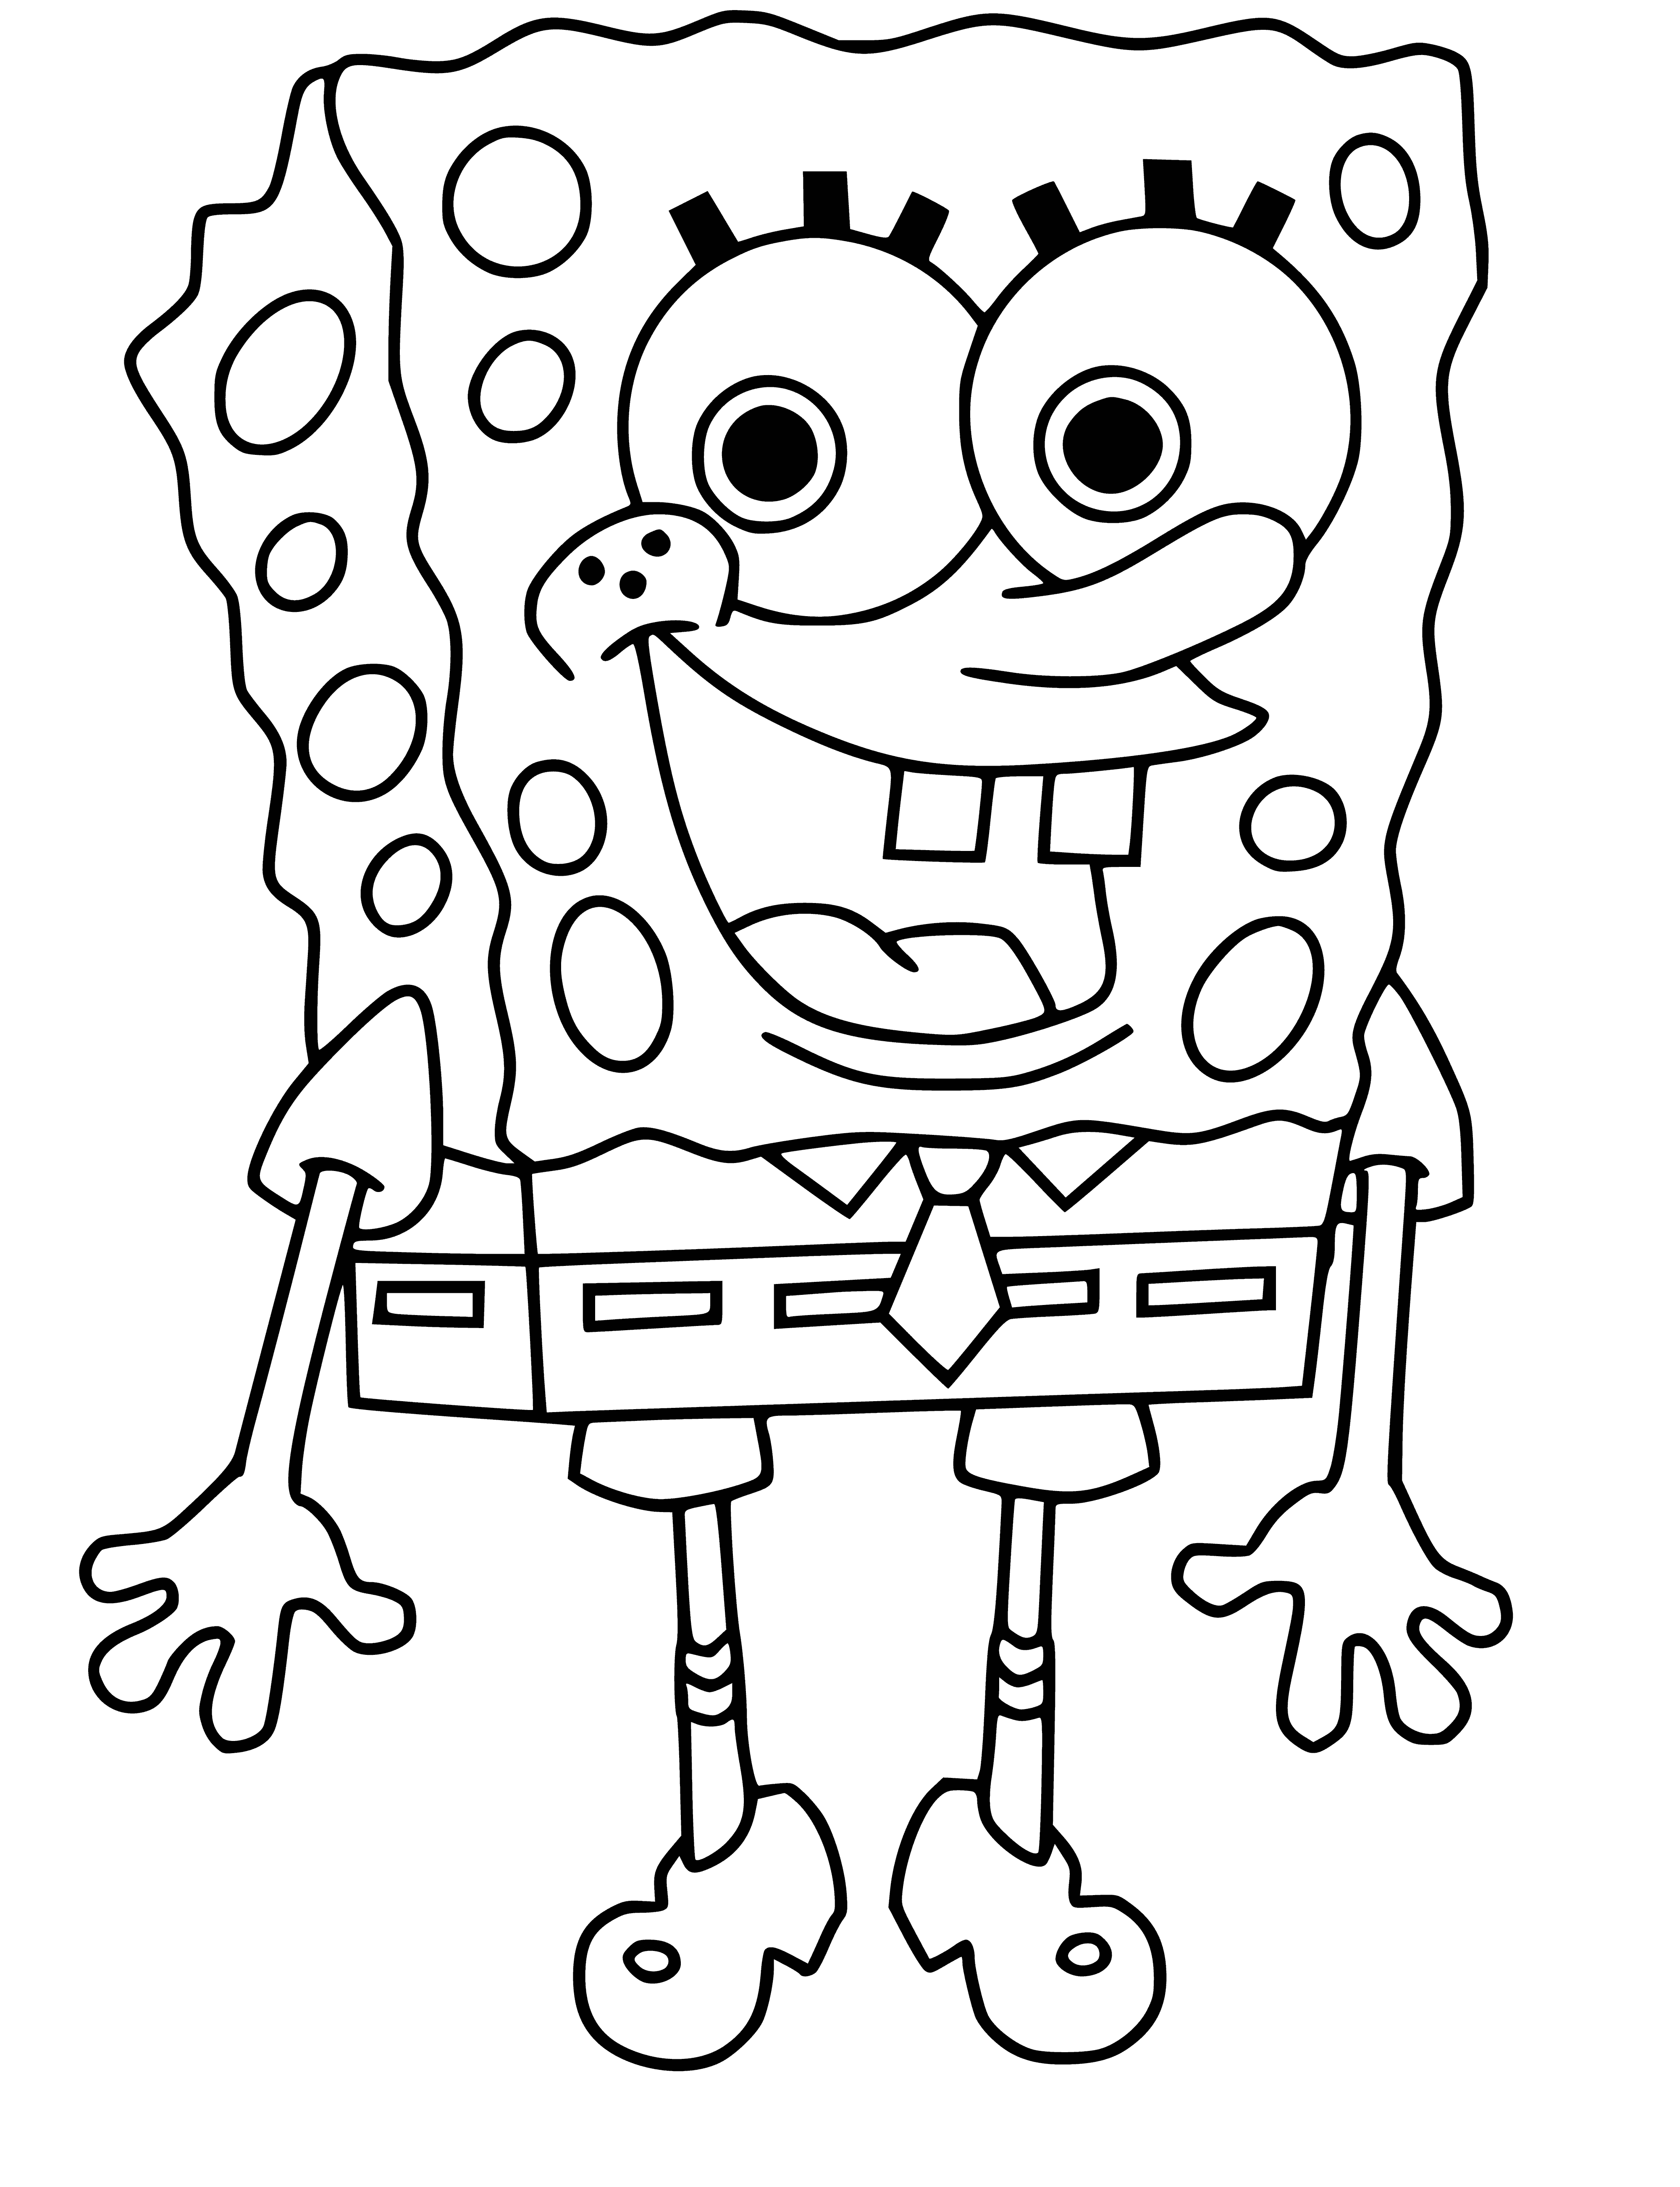 coloring page: Spongebob Squarepants, a yellow sponge with big eyes and a big smile, is wearing red shorts & blue shirt in the coloring page.